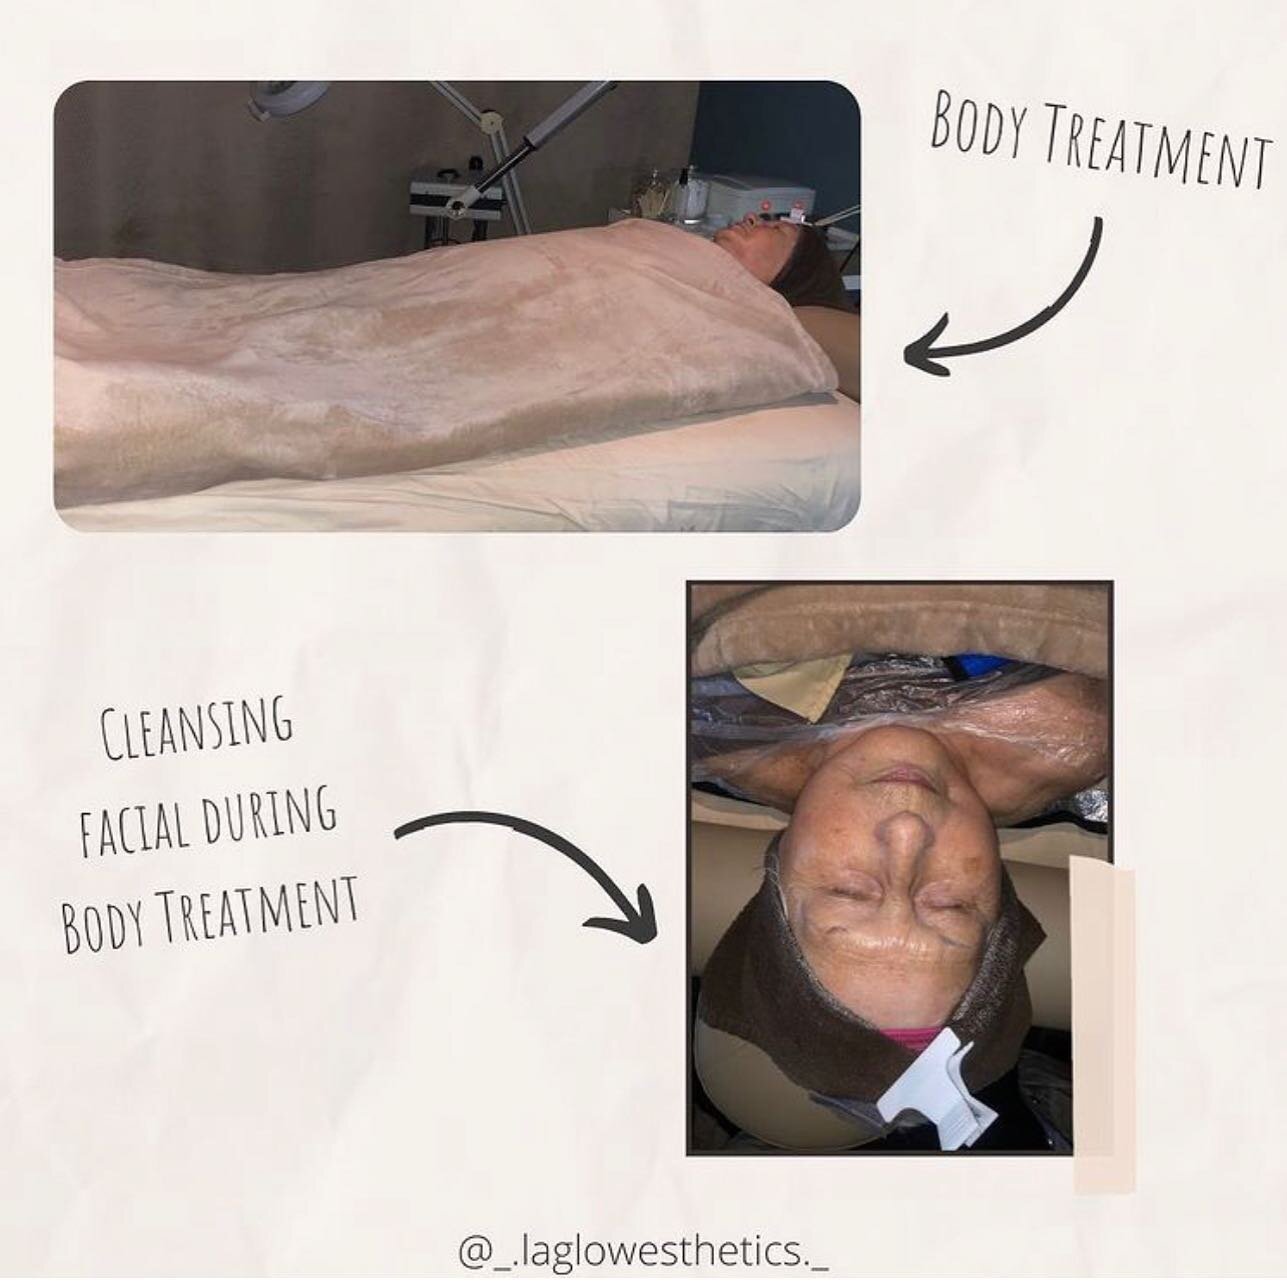 Body Treatment &amp; Cleansing Facial🧖🏽&zwj;♀️ ps. Body treatments are HALF OFF! 

Body Treatment: 
~ helps detox the body 
~ helps reduce excess fluids 
~ temporally helps firm areas of the body 

Cleansing Facial 
~ Facial cleanser 
~ Exfoliation